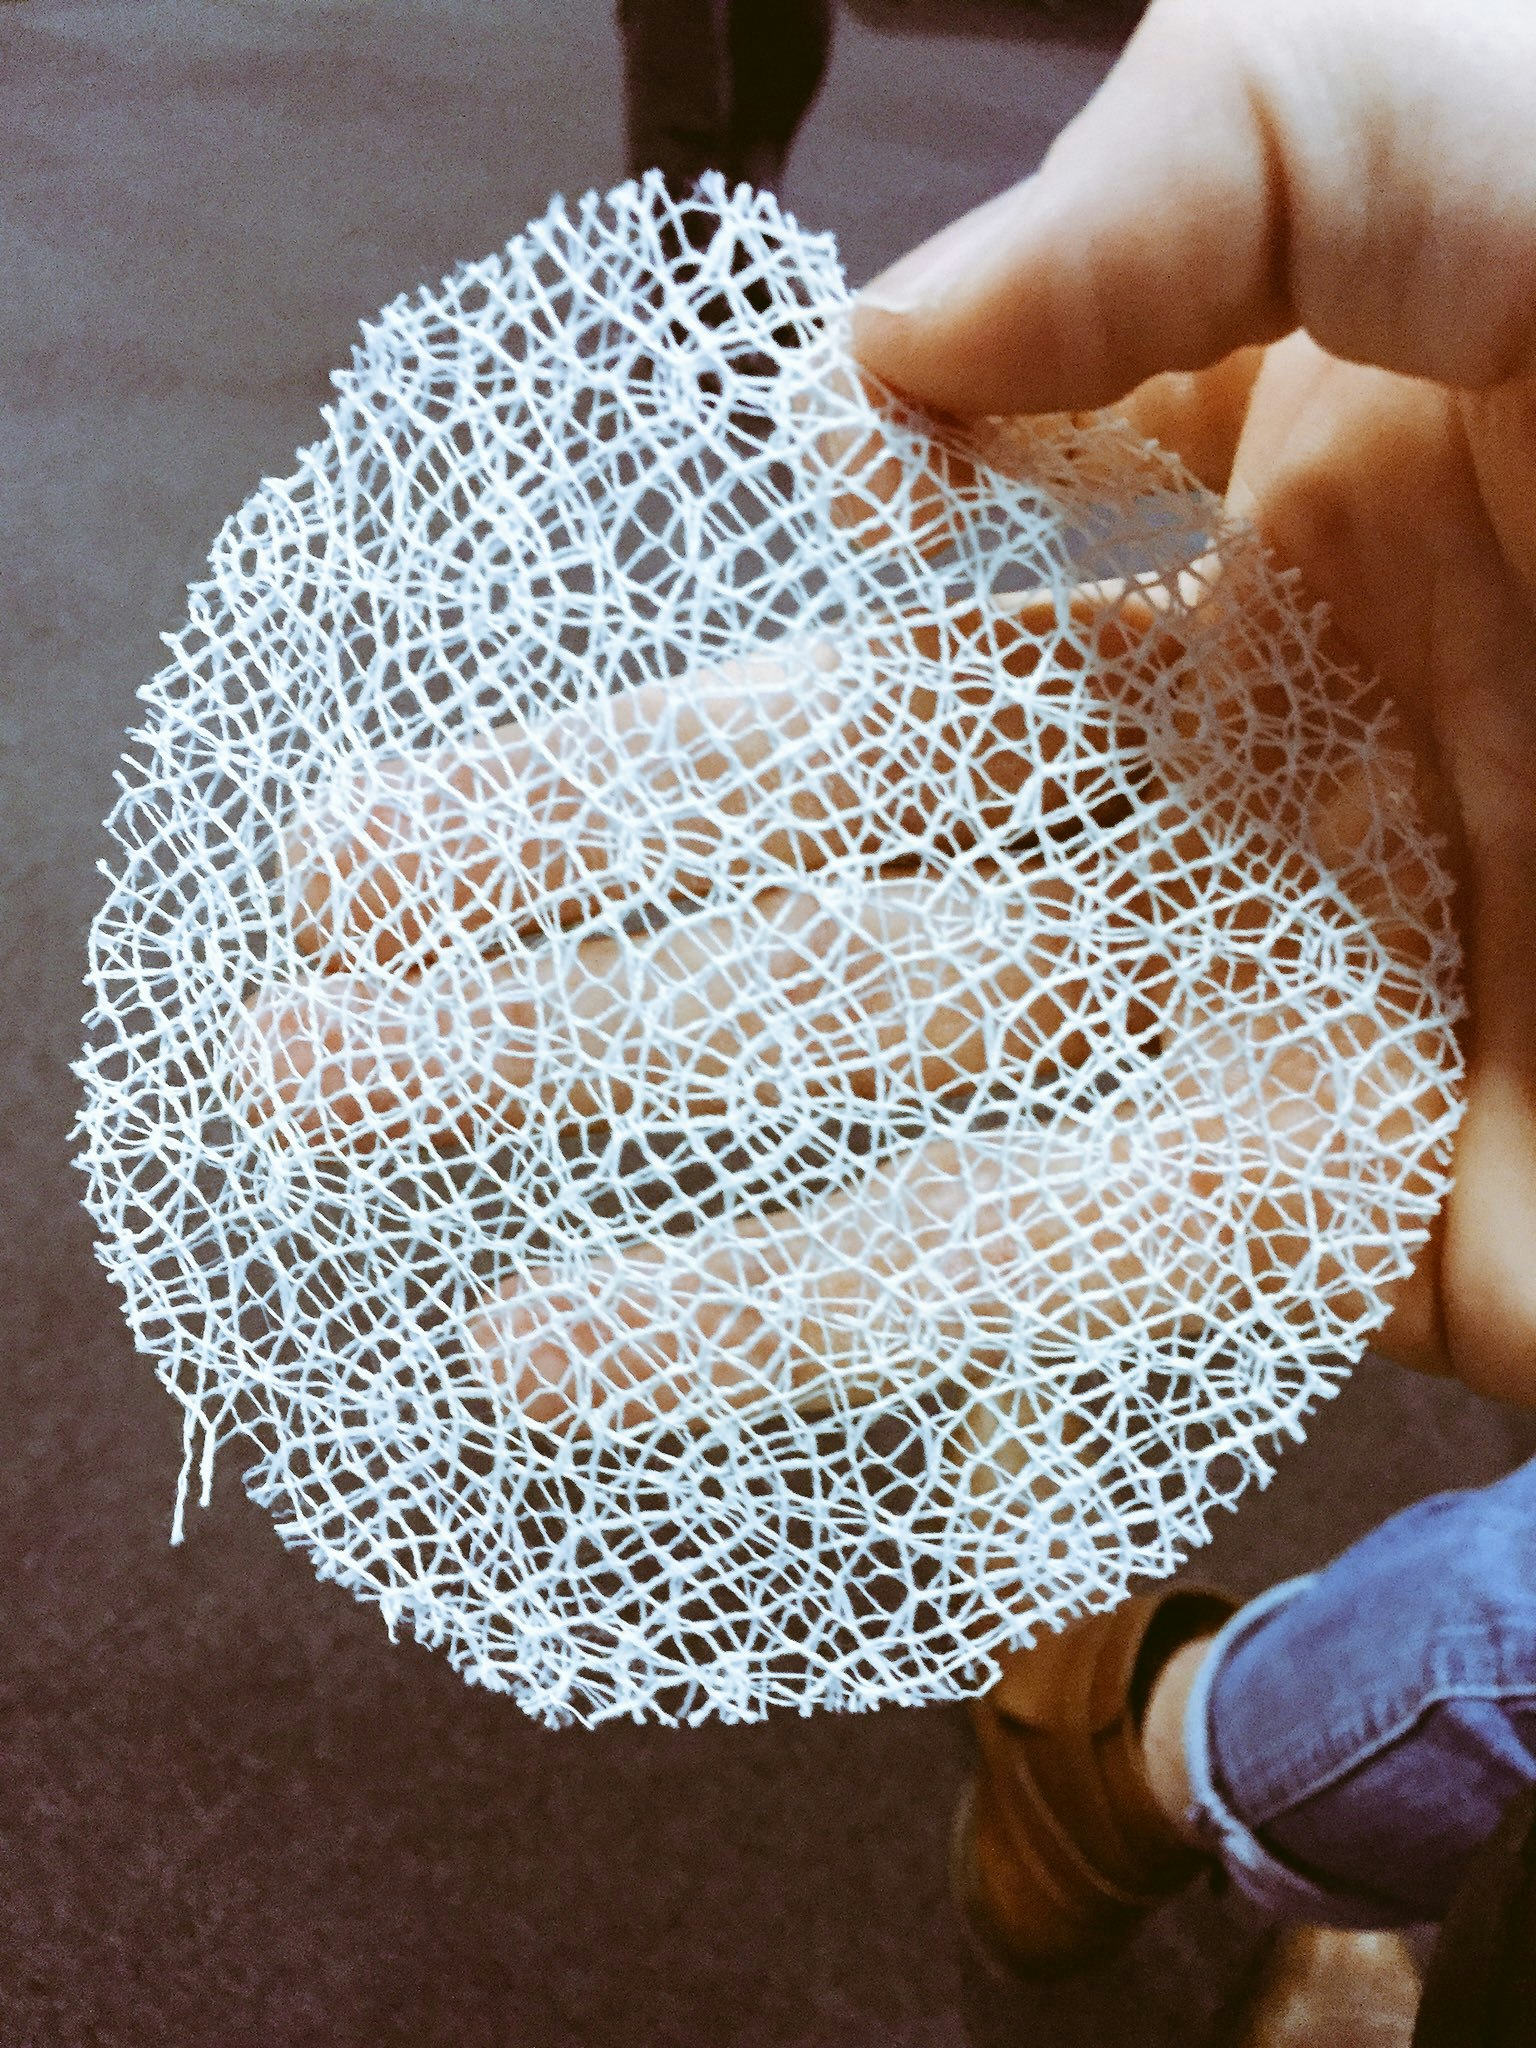 Lattice Medical showcases the intricate forms that can be 3Dprinted.